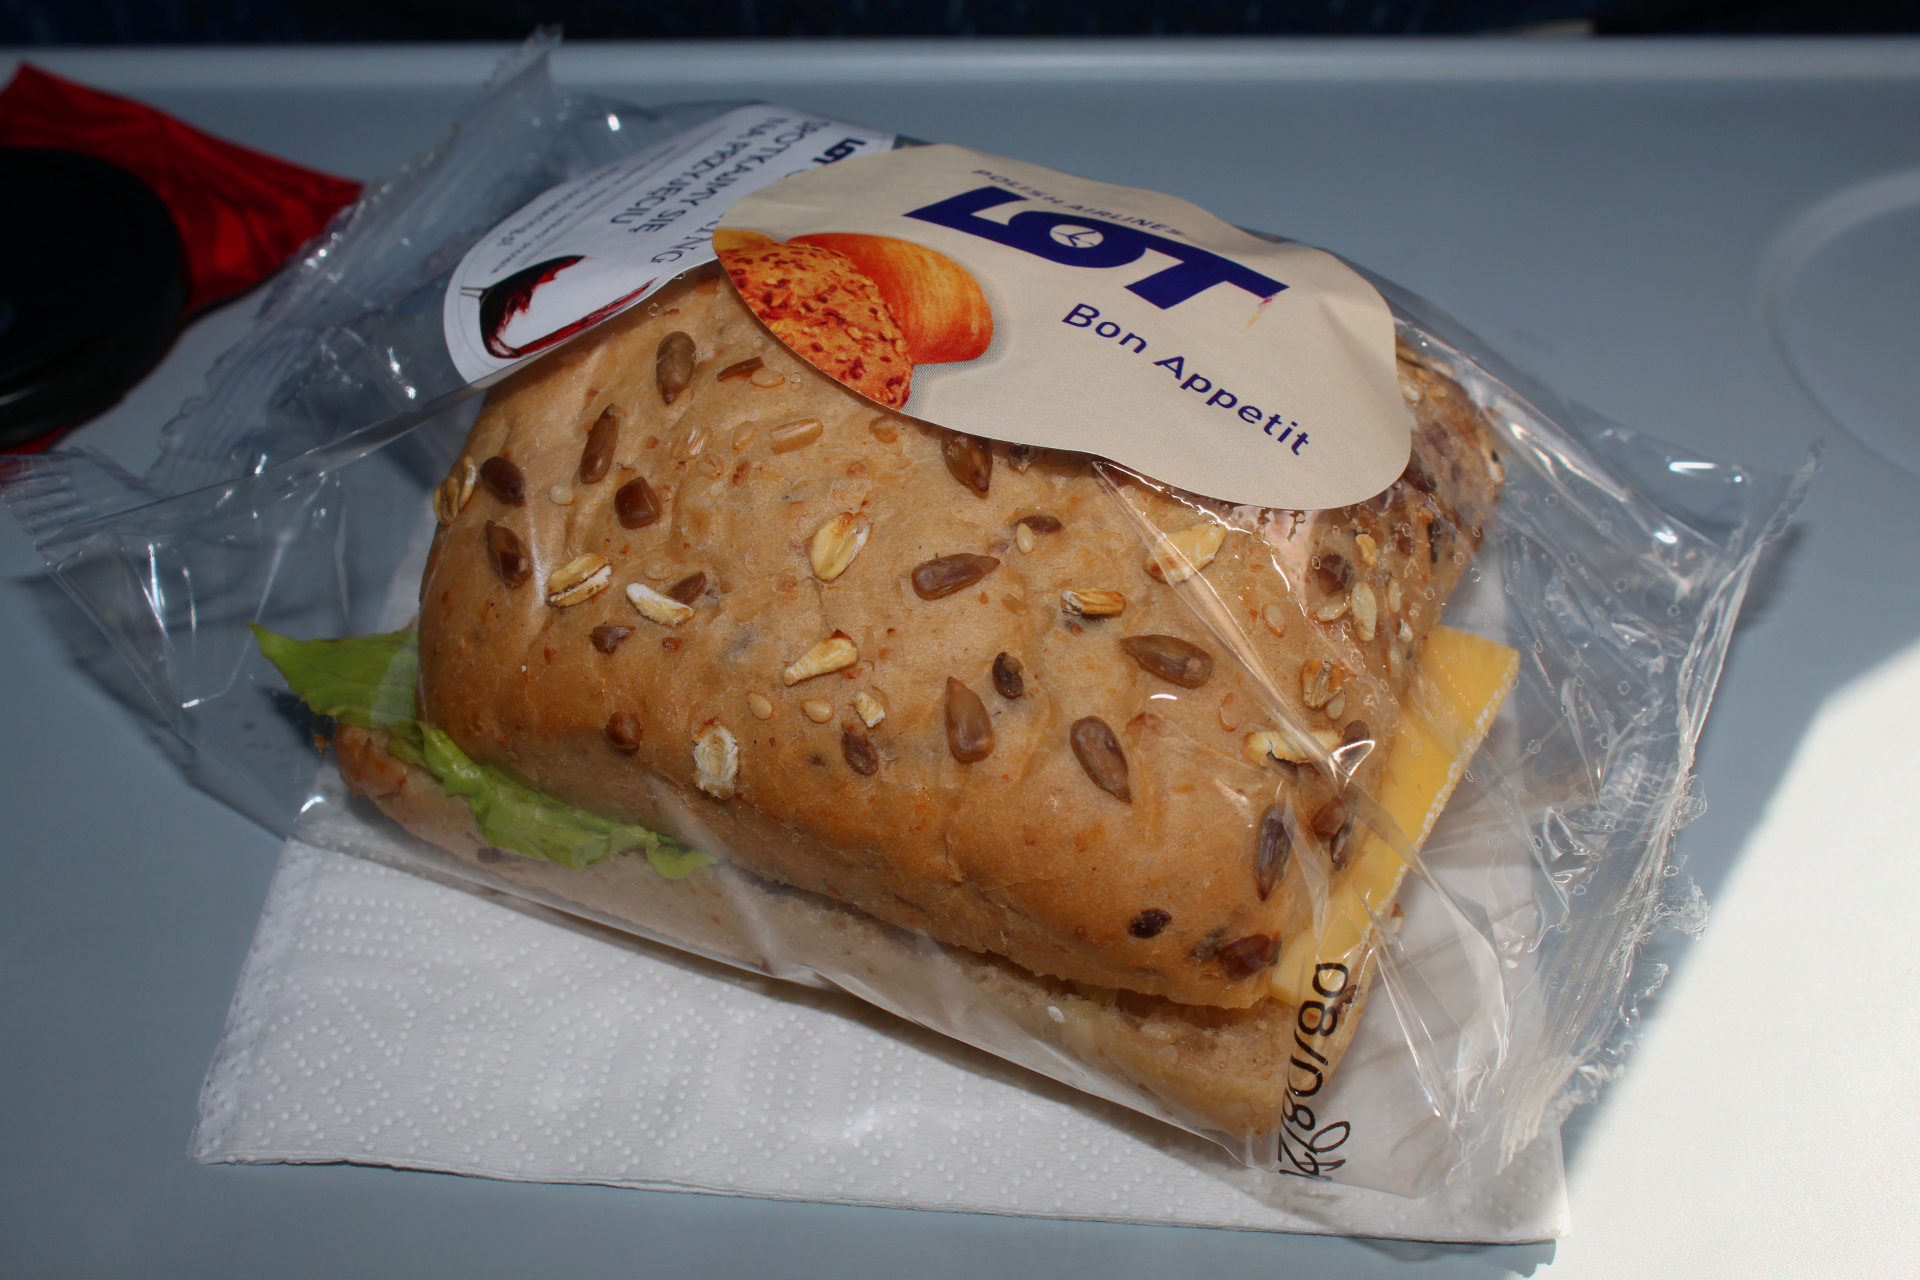 FRA-WAW: Snack (Travels » US Trip 3: The Roads Not Taken » The Flights)